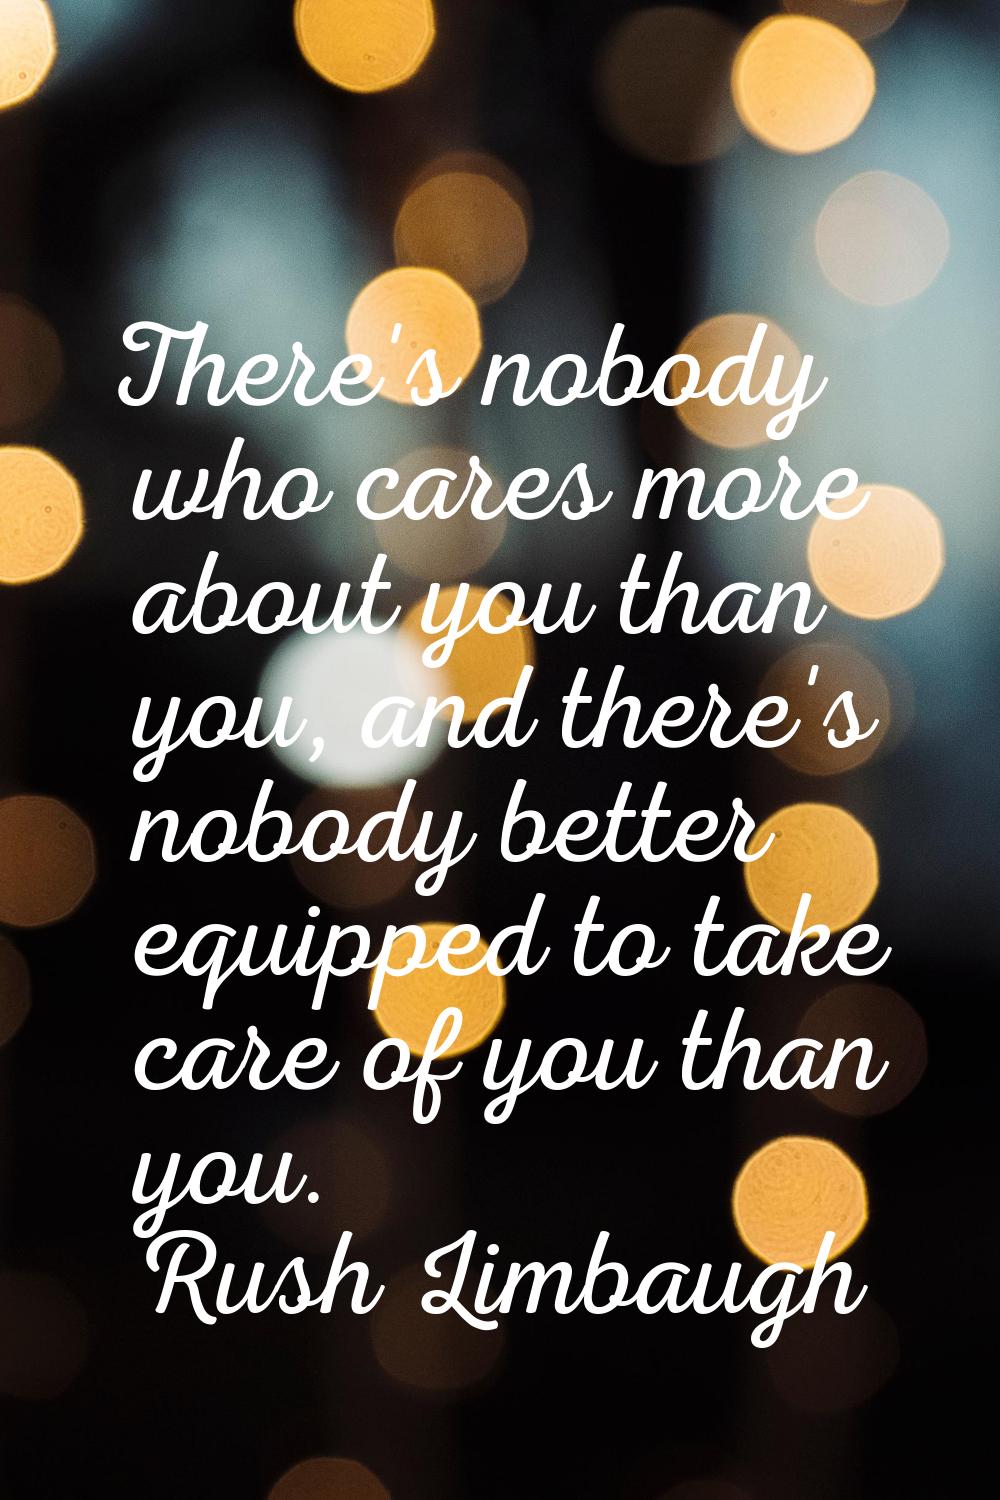 There's nobody who cares more about you than you, and there's nobody better equipped to take care o